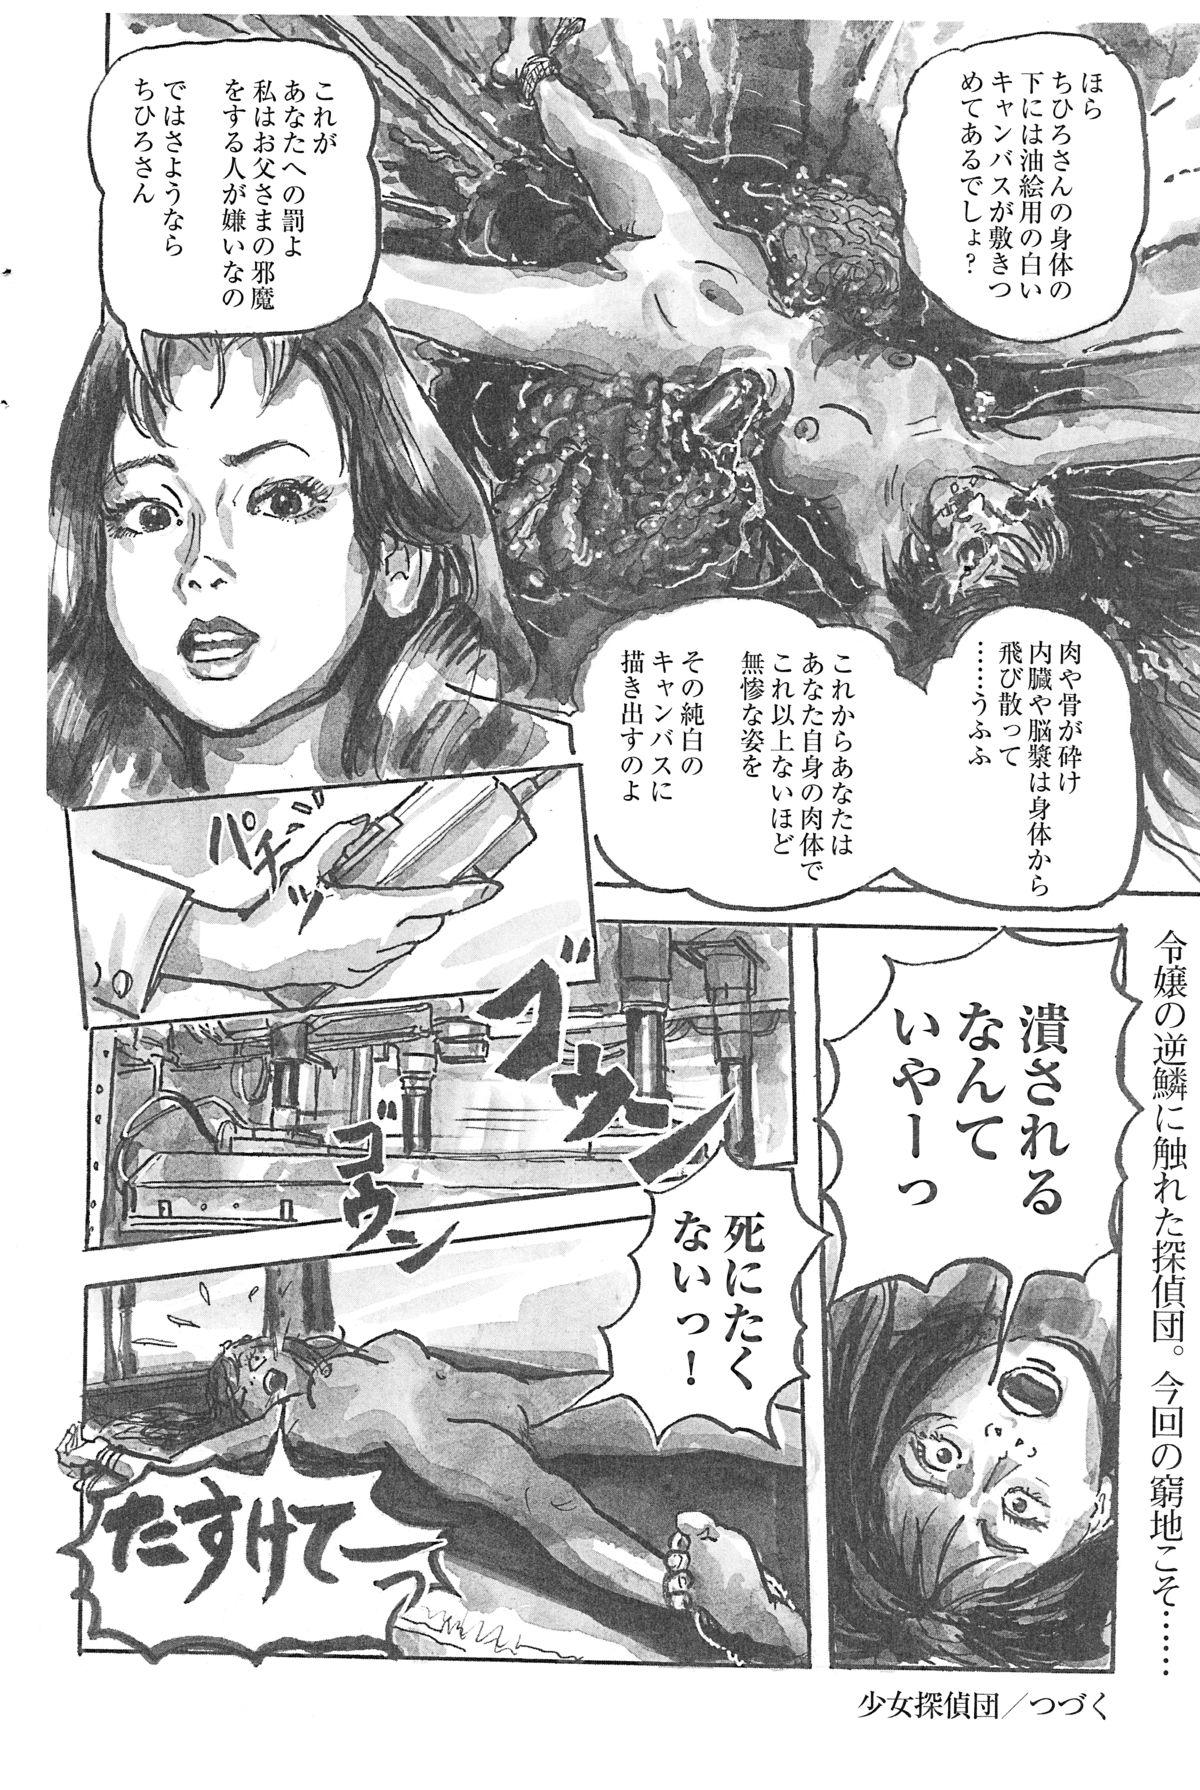 Office Sex Girl Detective Team part 4 「Dream Girl」 Sex - Page 10